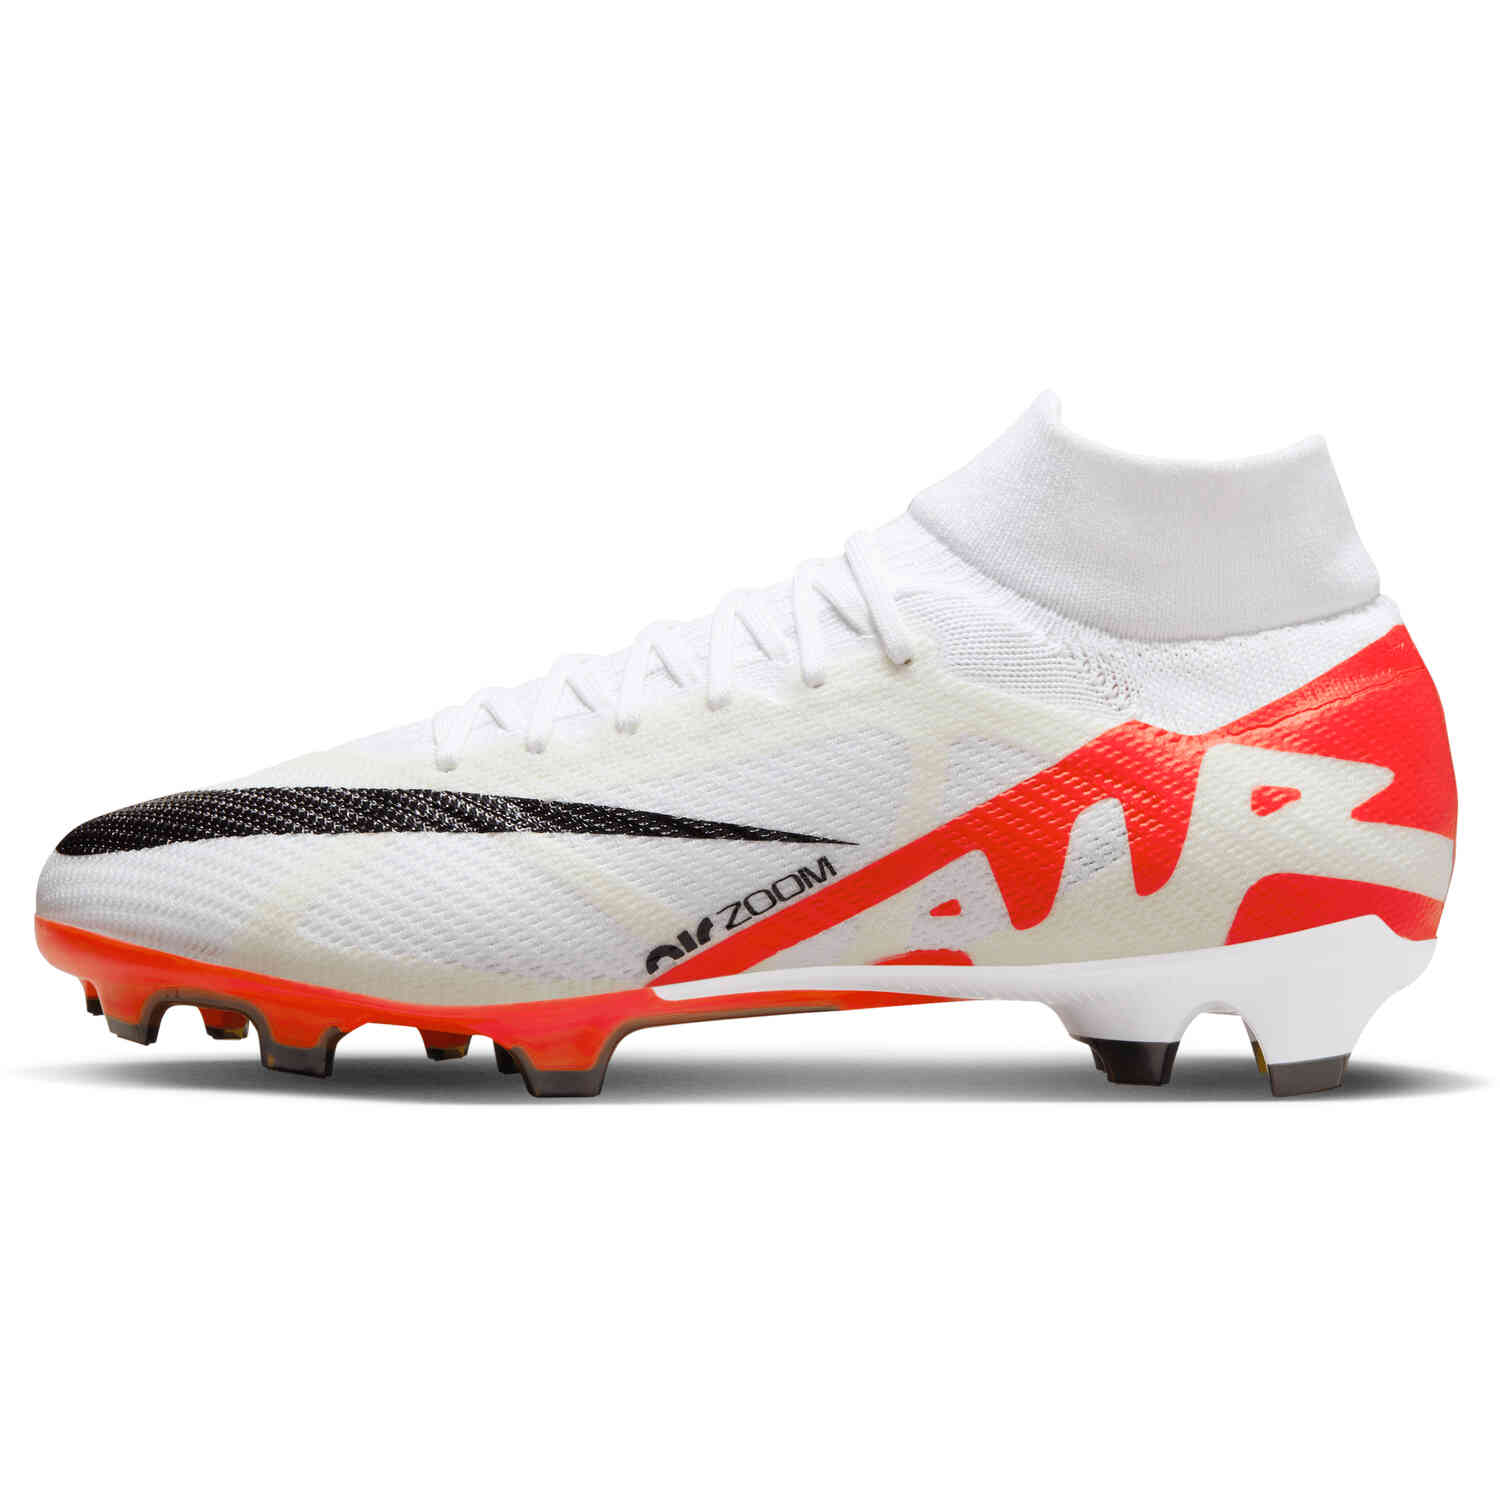 Nike Zoom Mercurial Superfly 9 Pro FG – Bright Crimson & White with Black